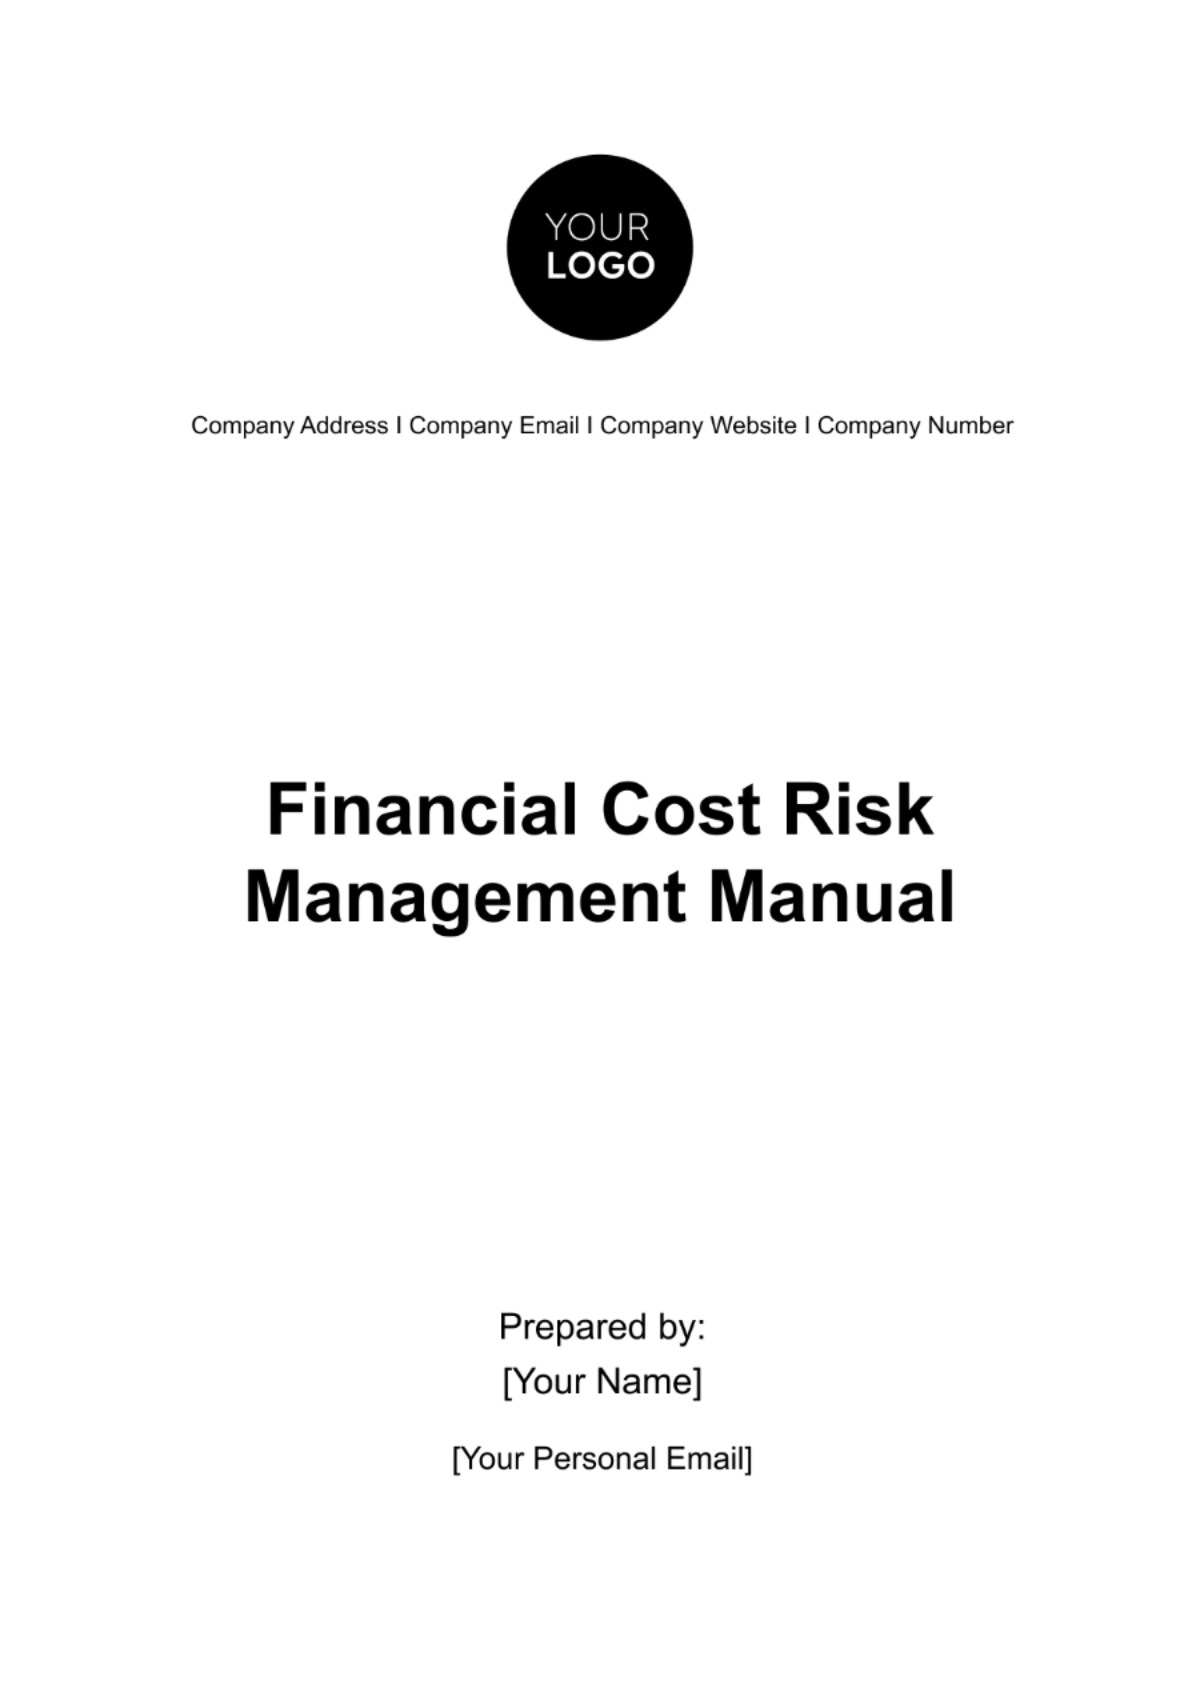 Financial Cost Risk Management Manual Template